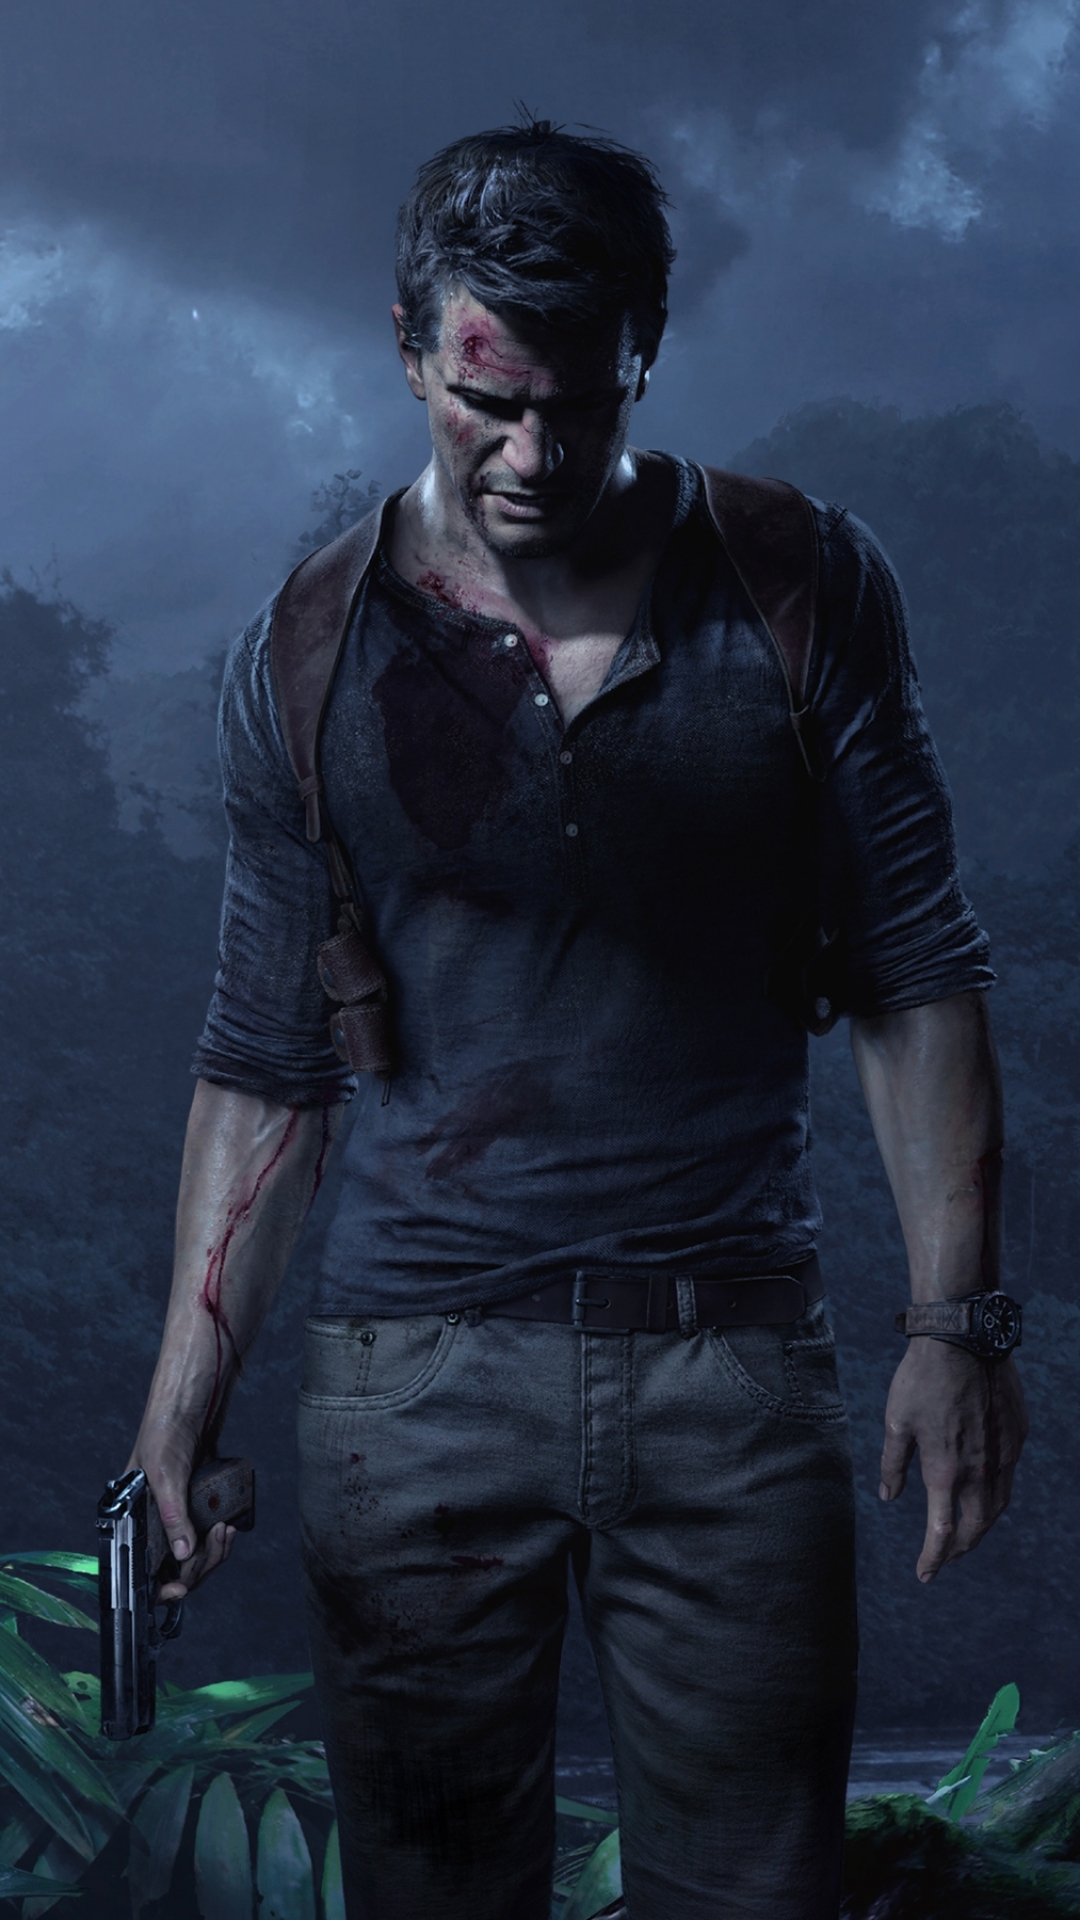 uncharted, video game, uncharted 4: a thief's end Full HD